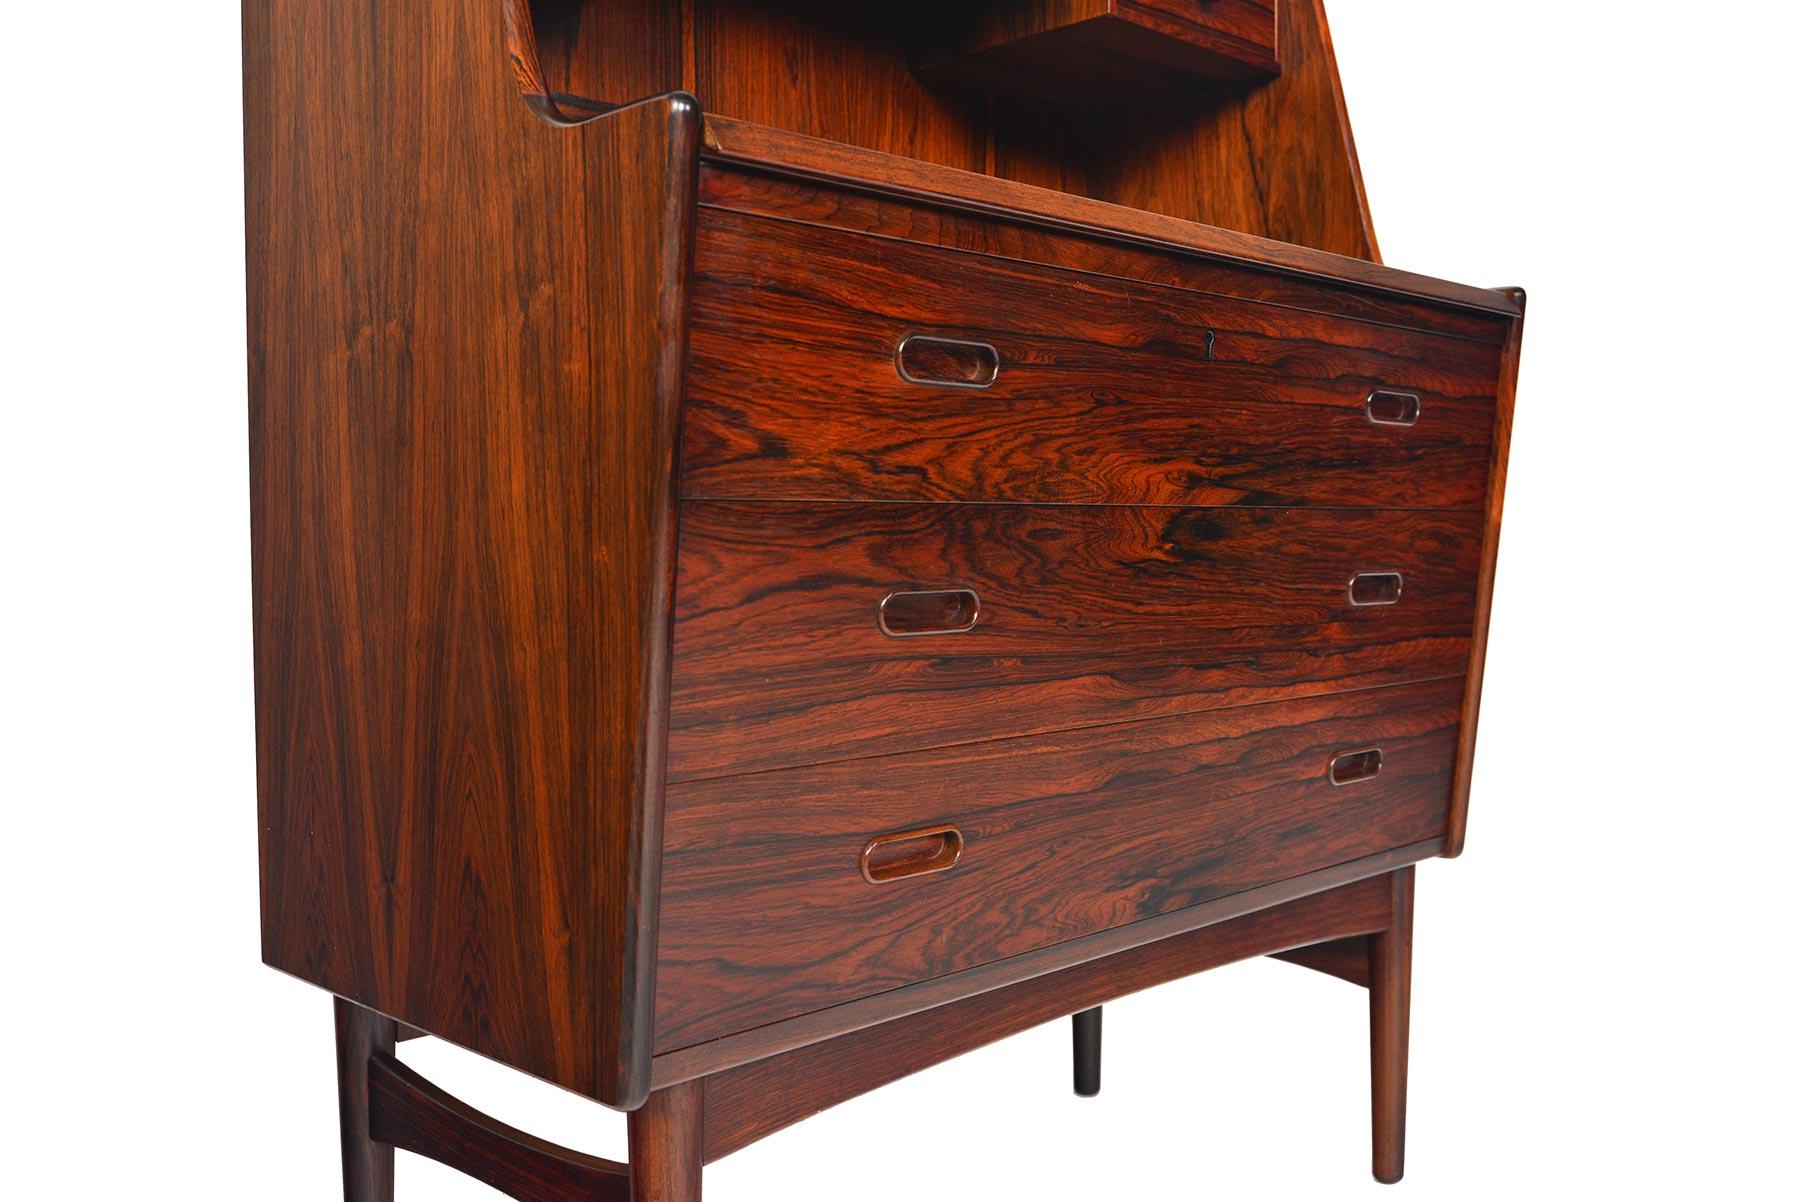 This lovely Danish modern secretary desk Model 60 in rosewood was designed by Arne Wahl Iversen for Vinde Møbelfabrik in the 1960s. This piece offers spacious storage and an easy to access workspace. Beautifully crafted drawers and storage dividers